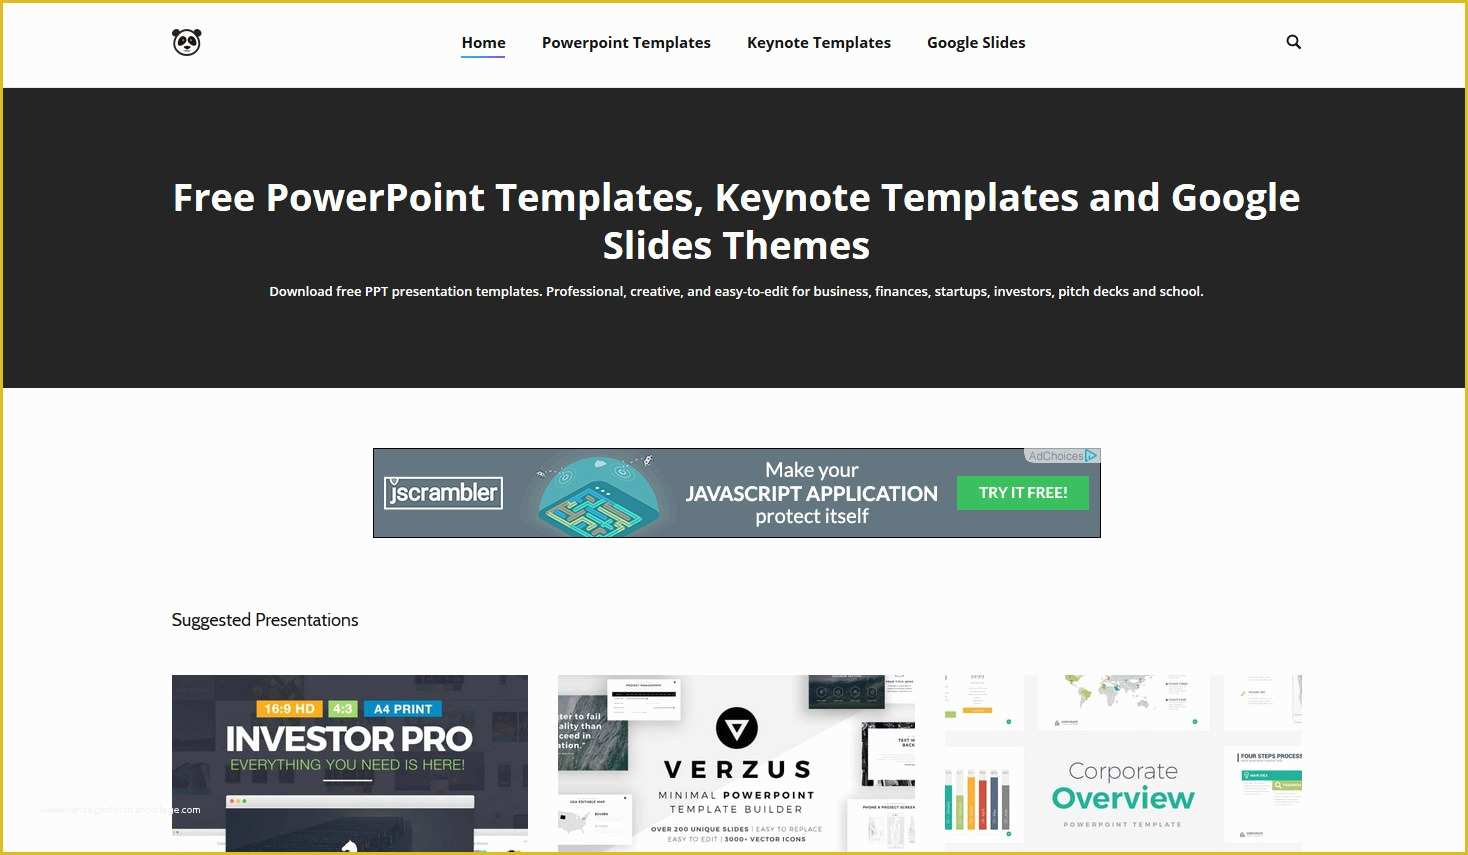 Free Powerpoint Presentation Templates Of 4 Sites with Free Beautiful Powerpoint Templates Keynotes